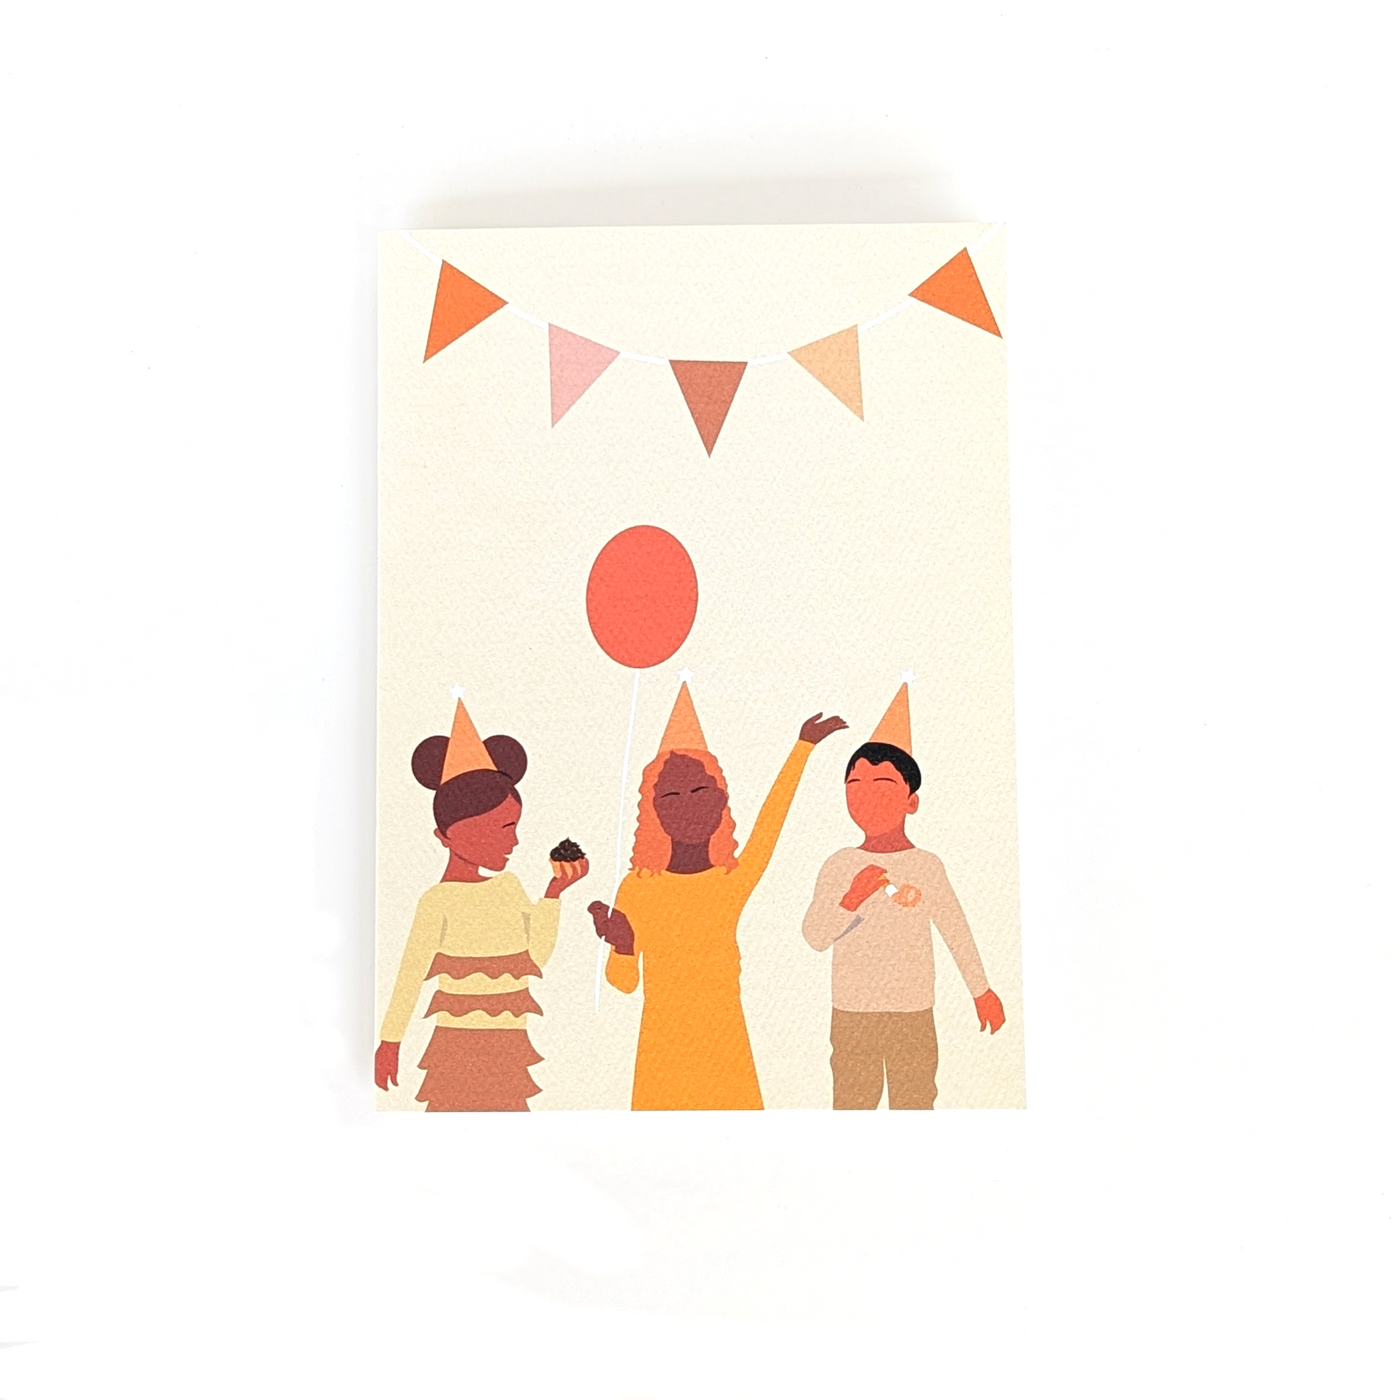 kids birthday card that that showcases three children of color donning festive party hats and holding colorful balloons.